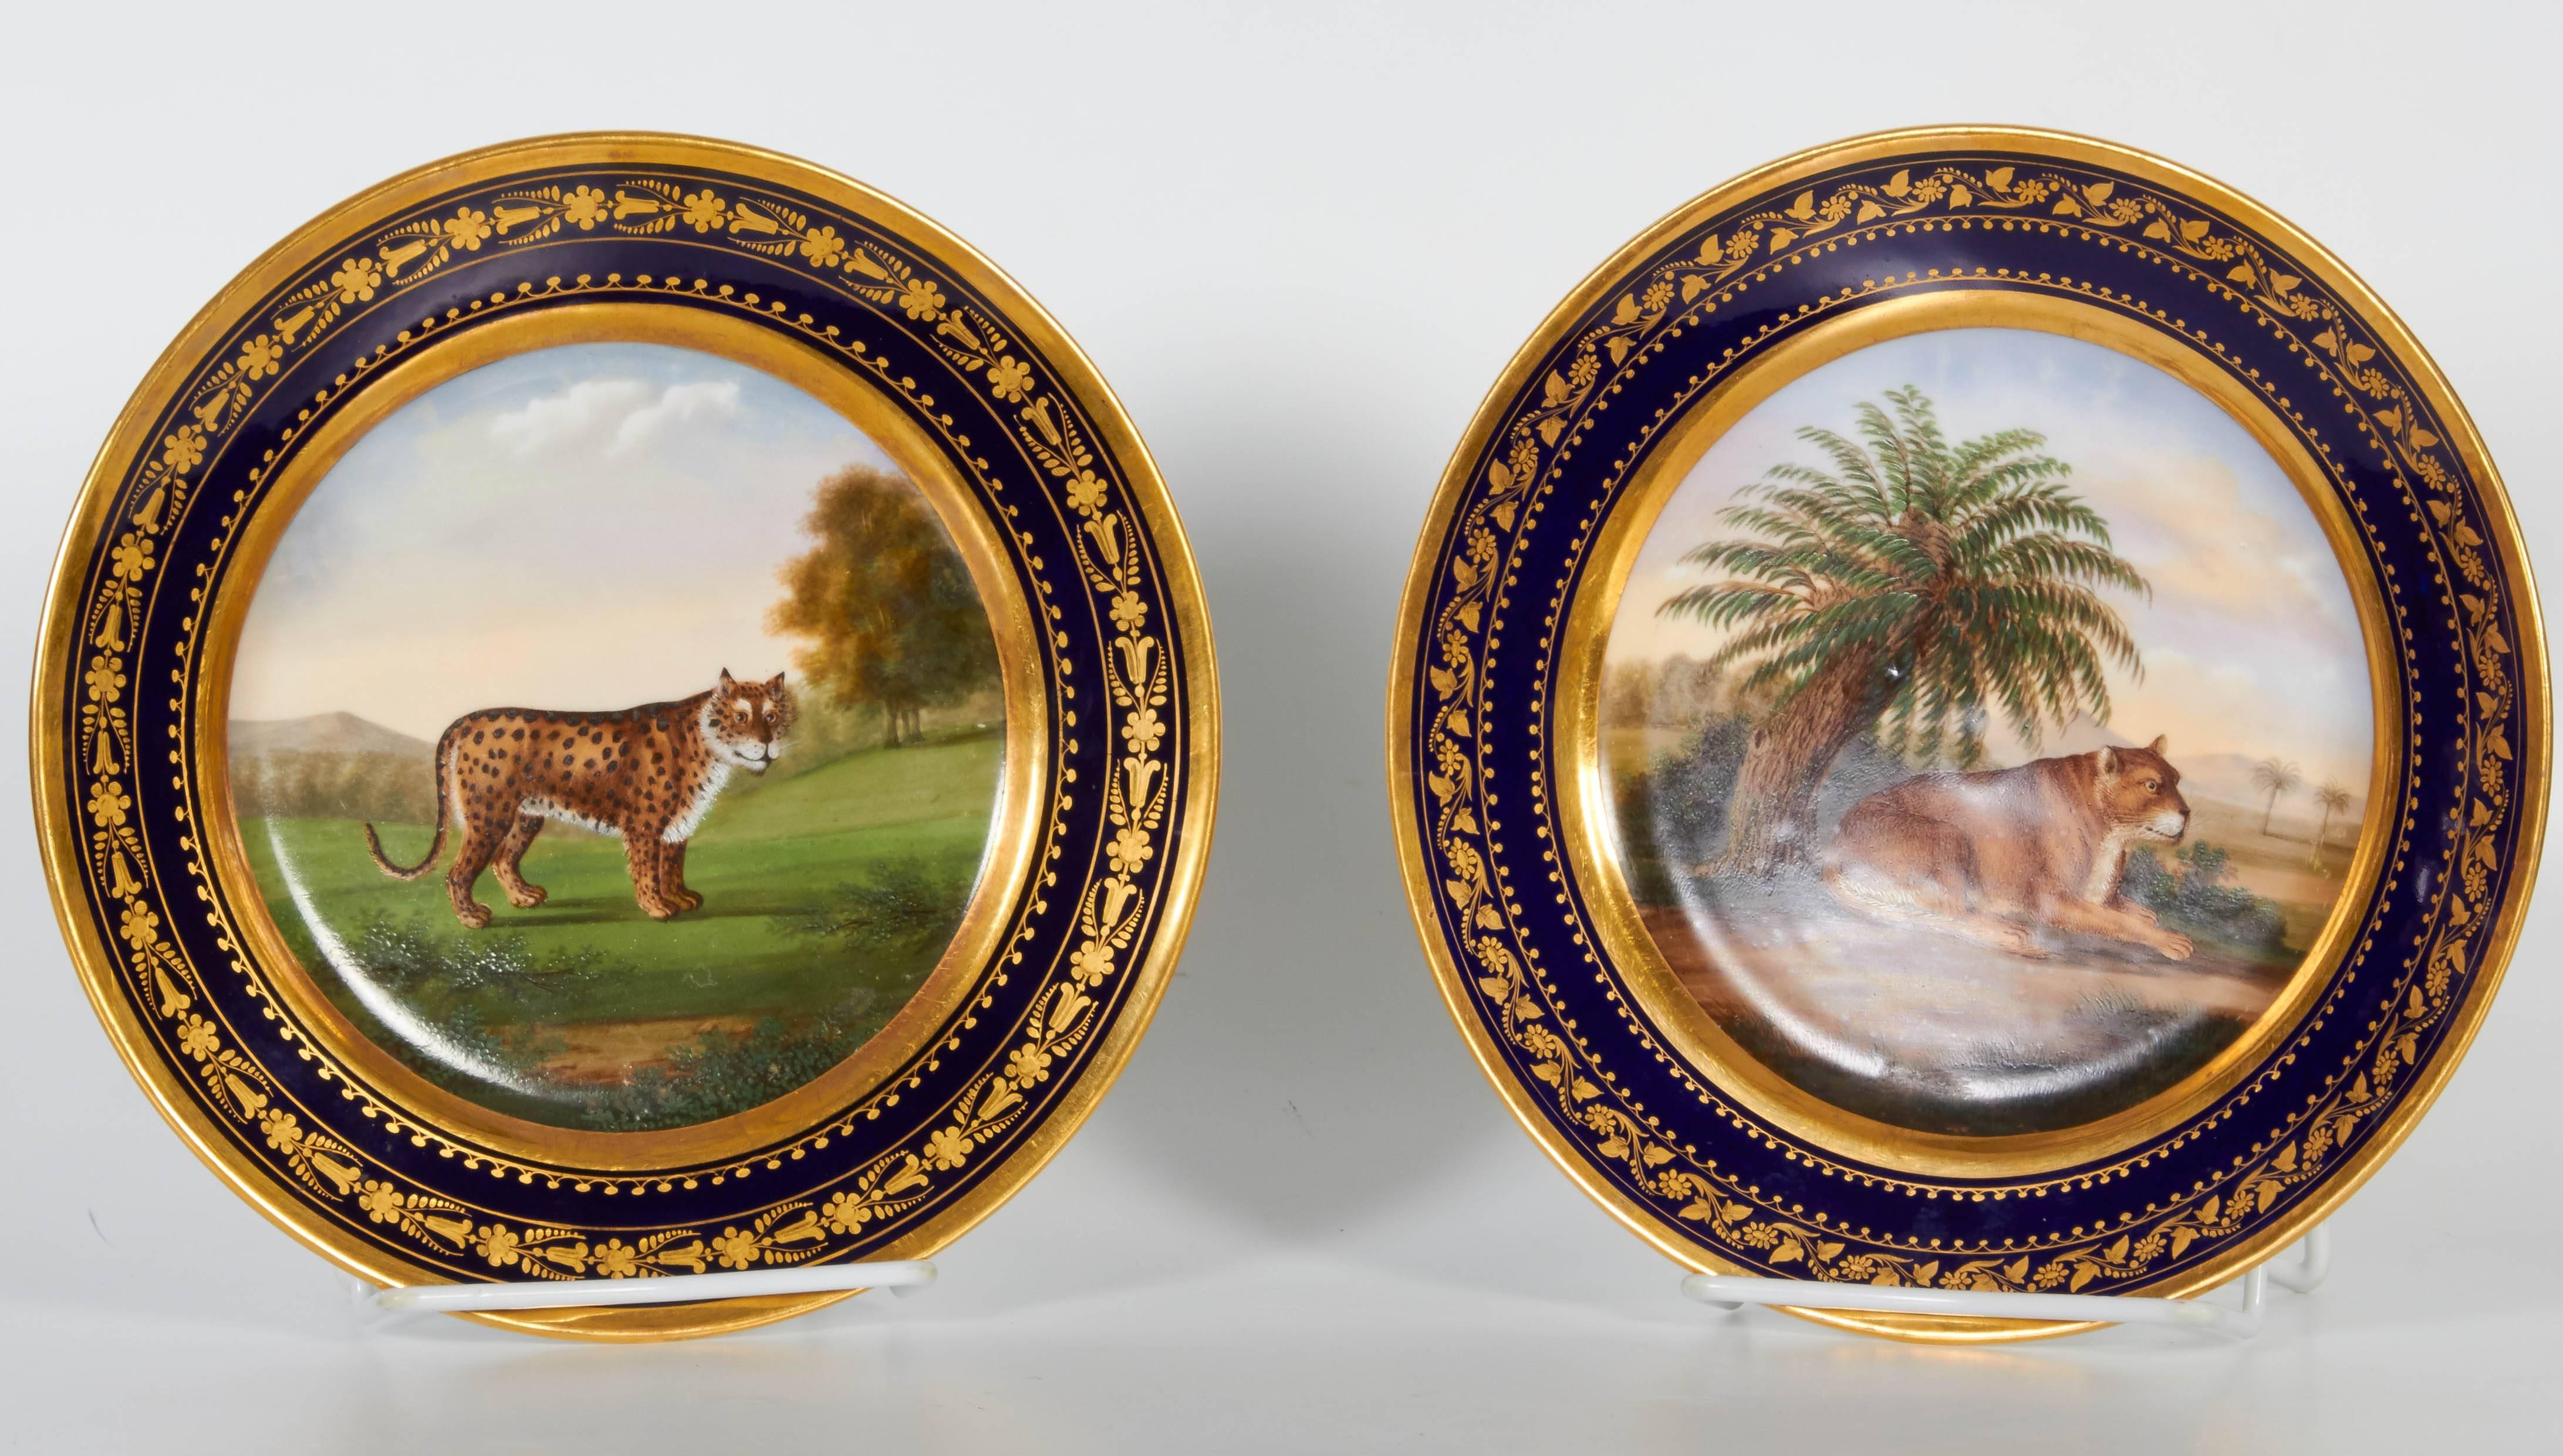 Pair of antique Darte Brothers cobalt blue porcelain plates magnificently painted with lioness and cheetah in lush green landscapes, decorated with two-tone 24 karat gold. Each with the original Darte Brothers Royal signature mark in red ink, one